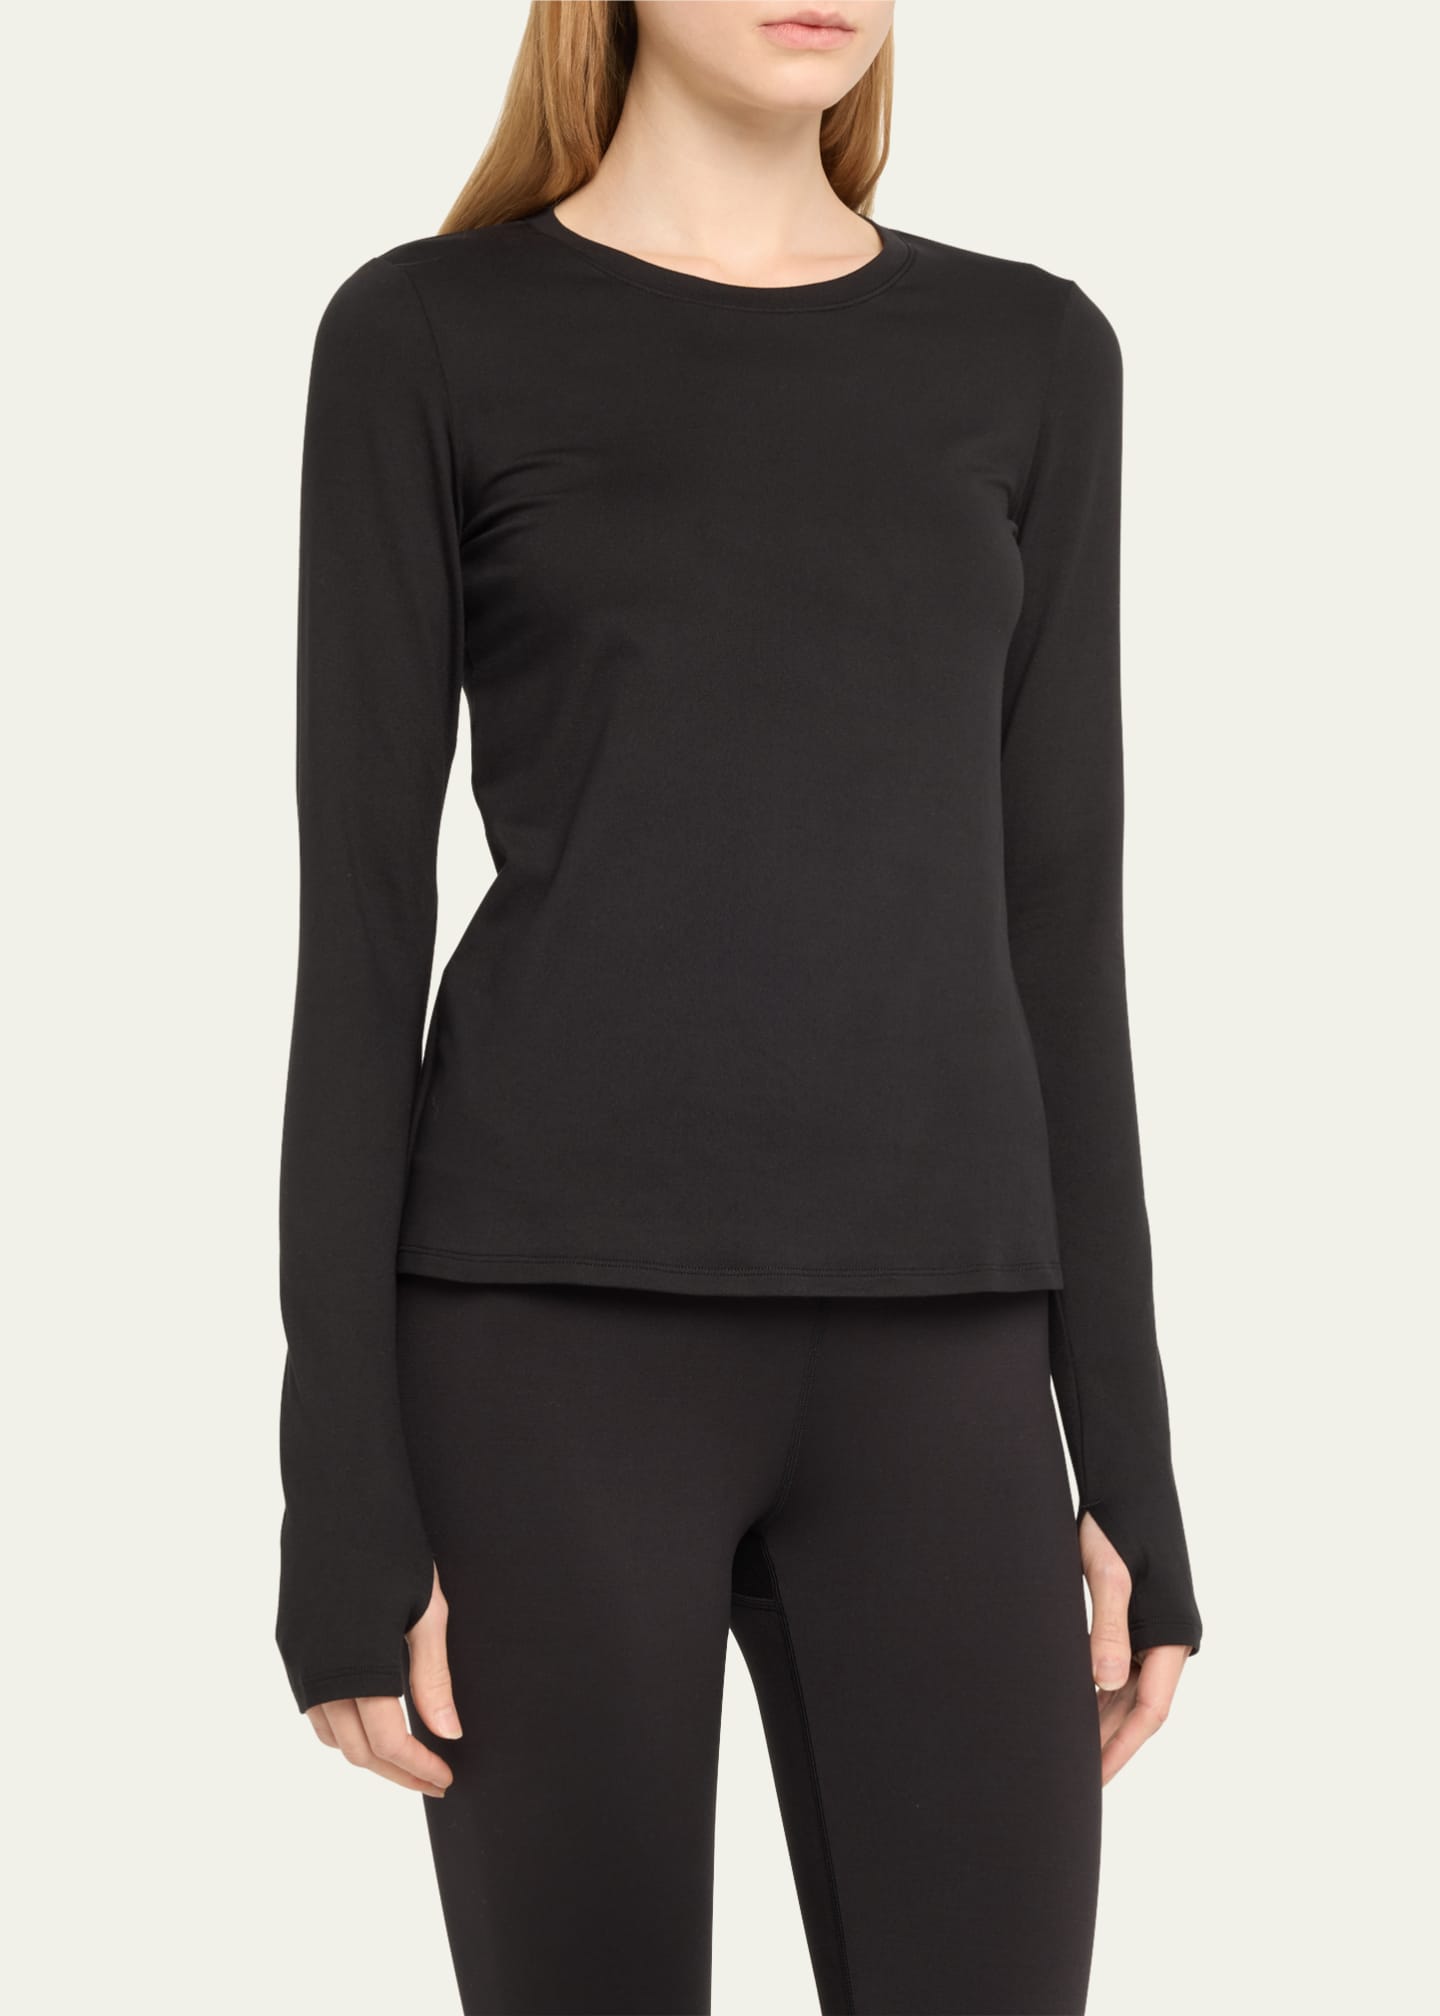 Alosoft Crop Finesse Long Sleeve Top in Steel Blue by Alo Yoga - Work Well  Daily